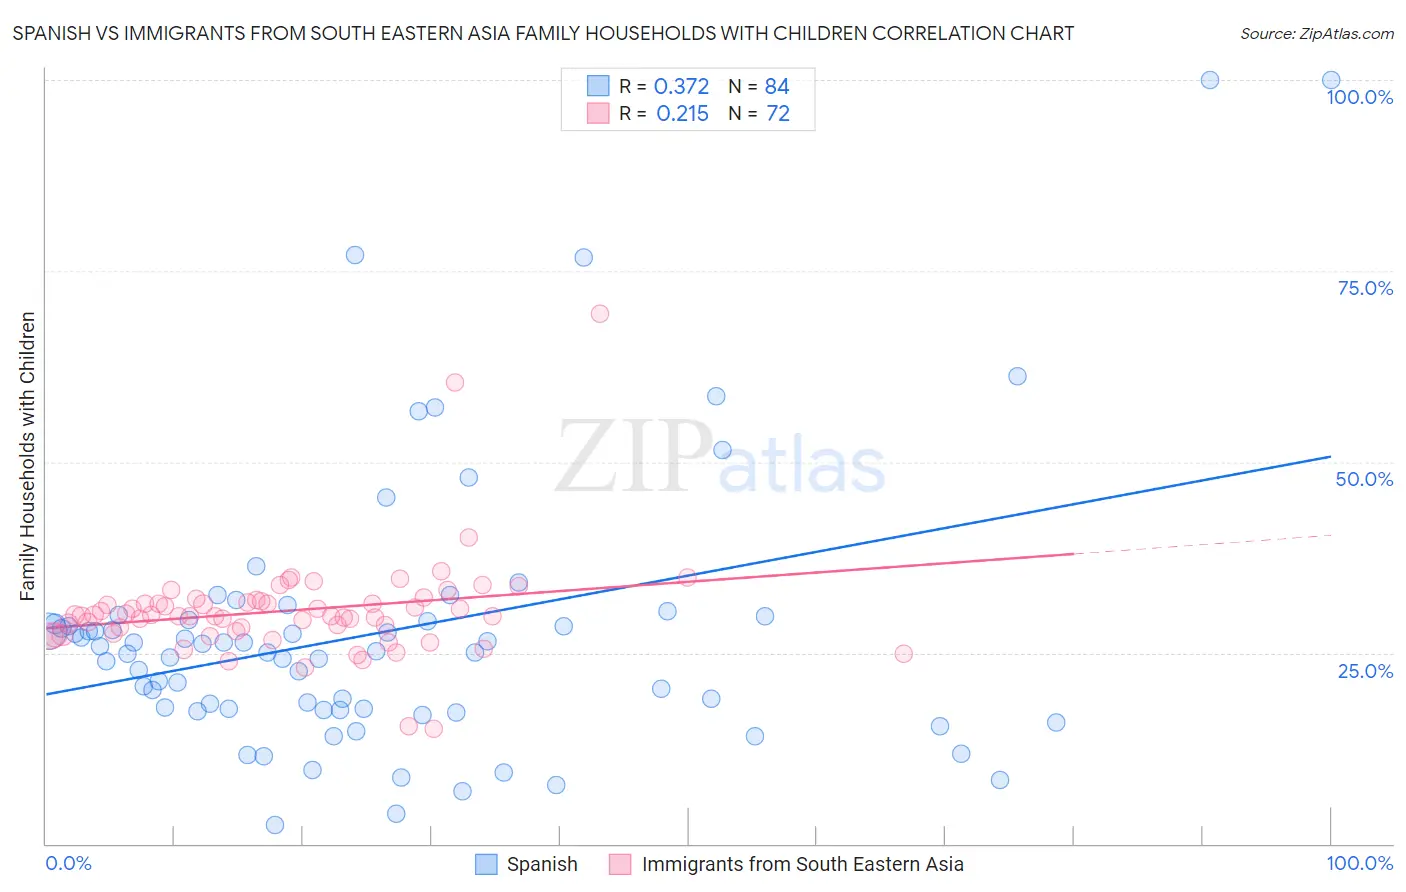 Spanish vs Immigrants from South Eastern Asia Family Households with Children